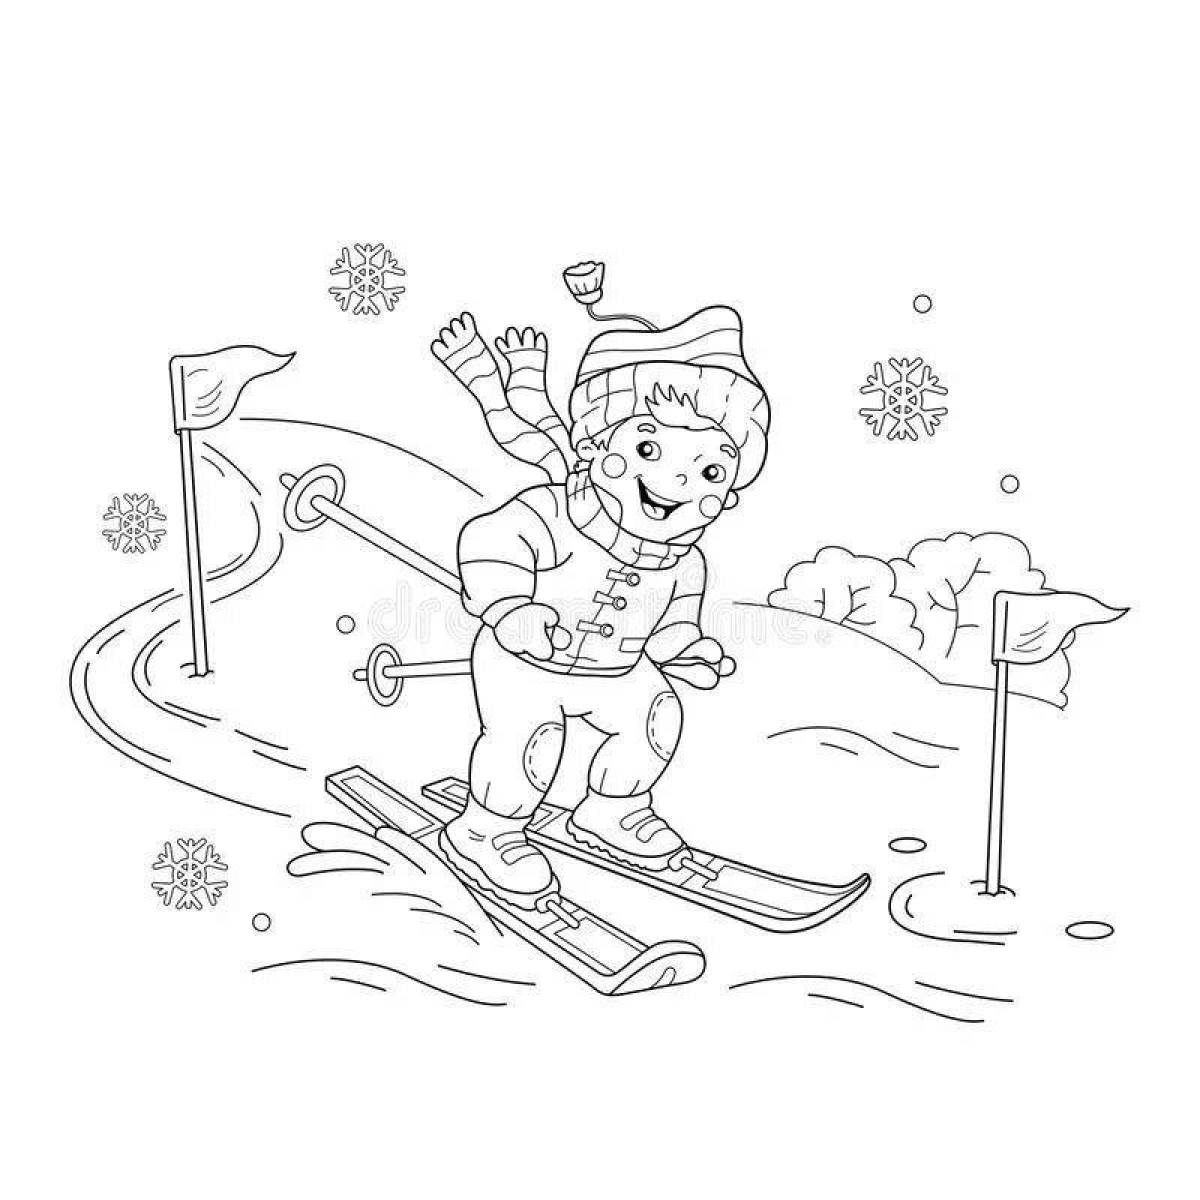 Coloring page determined boy on skis